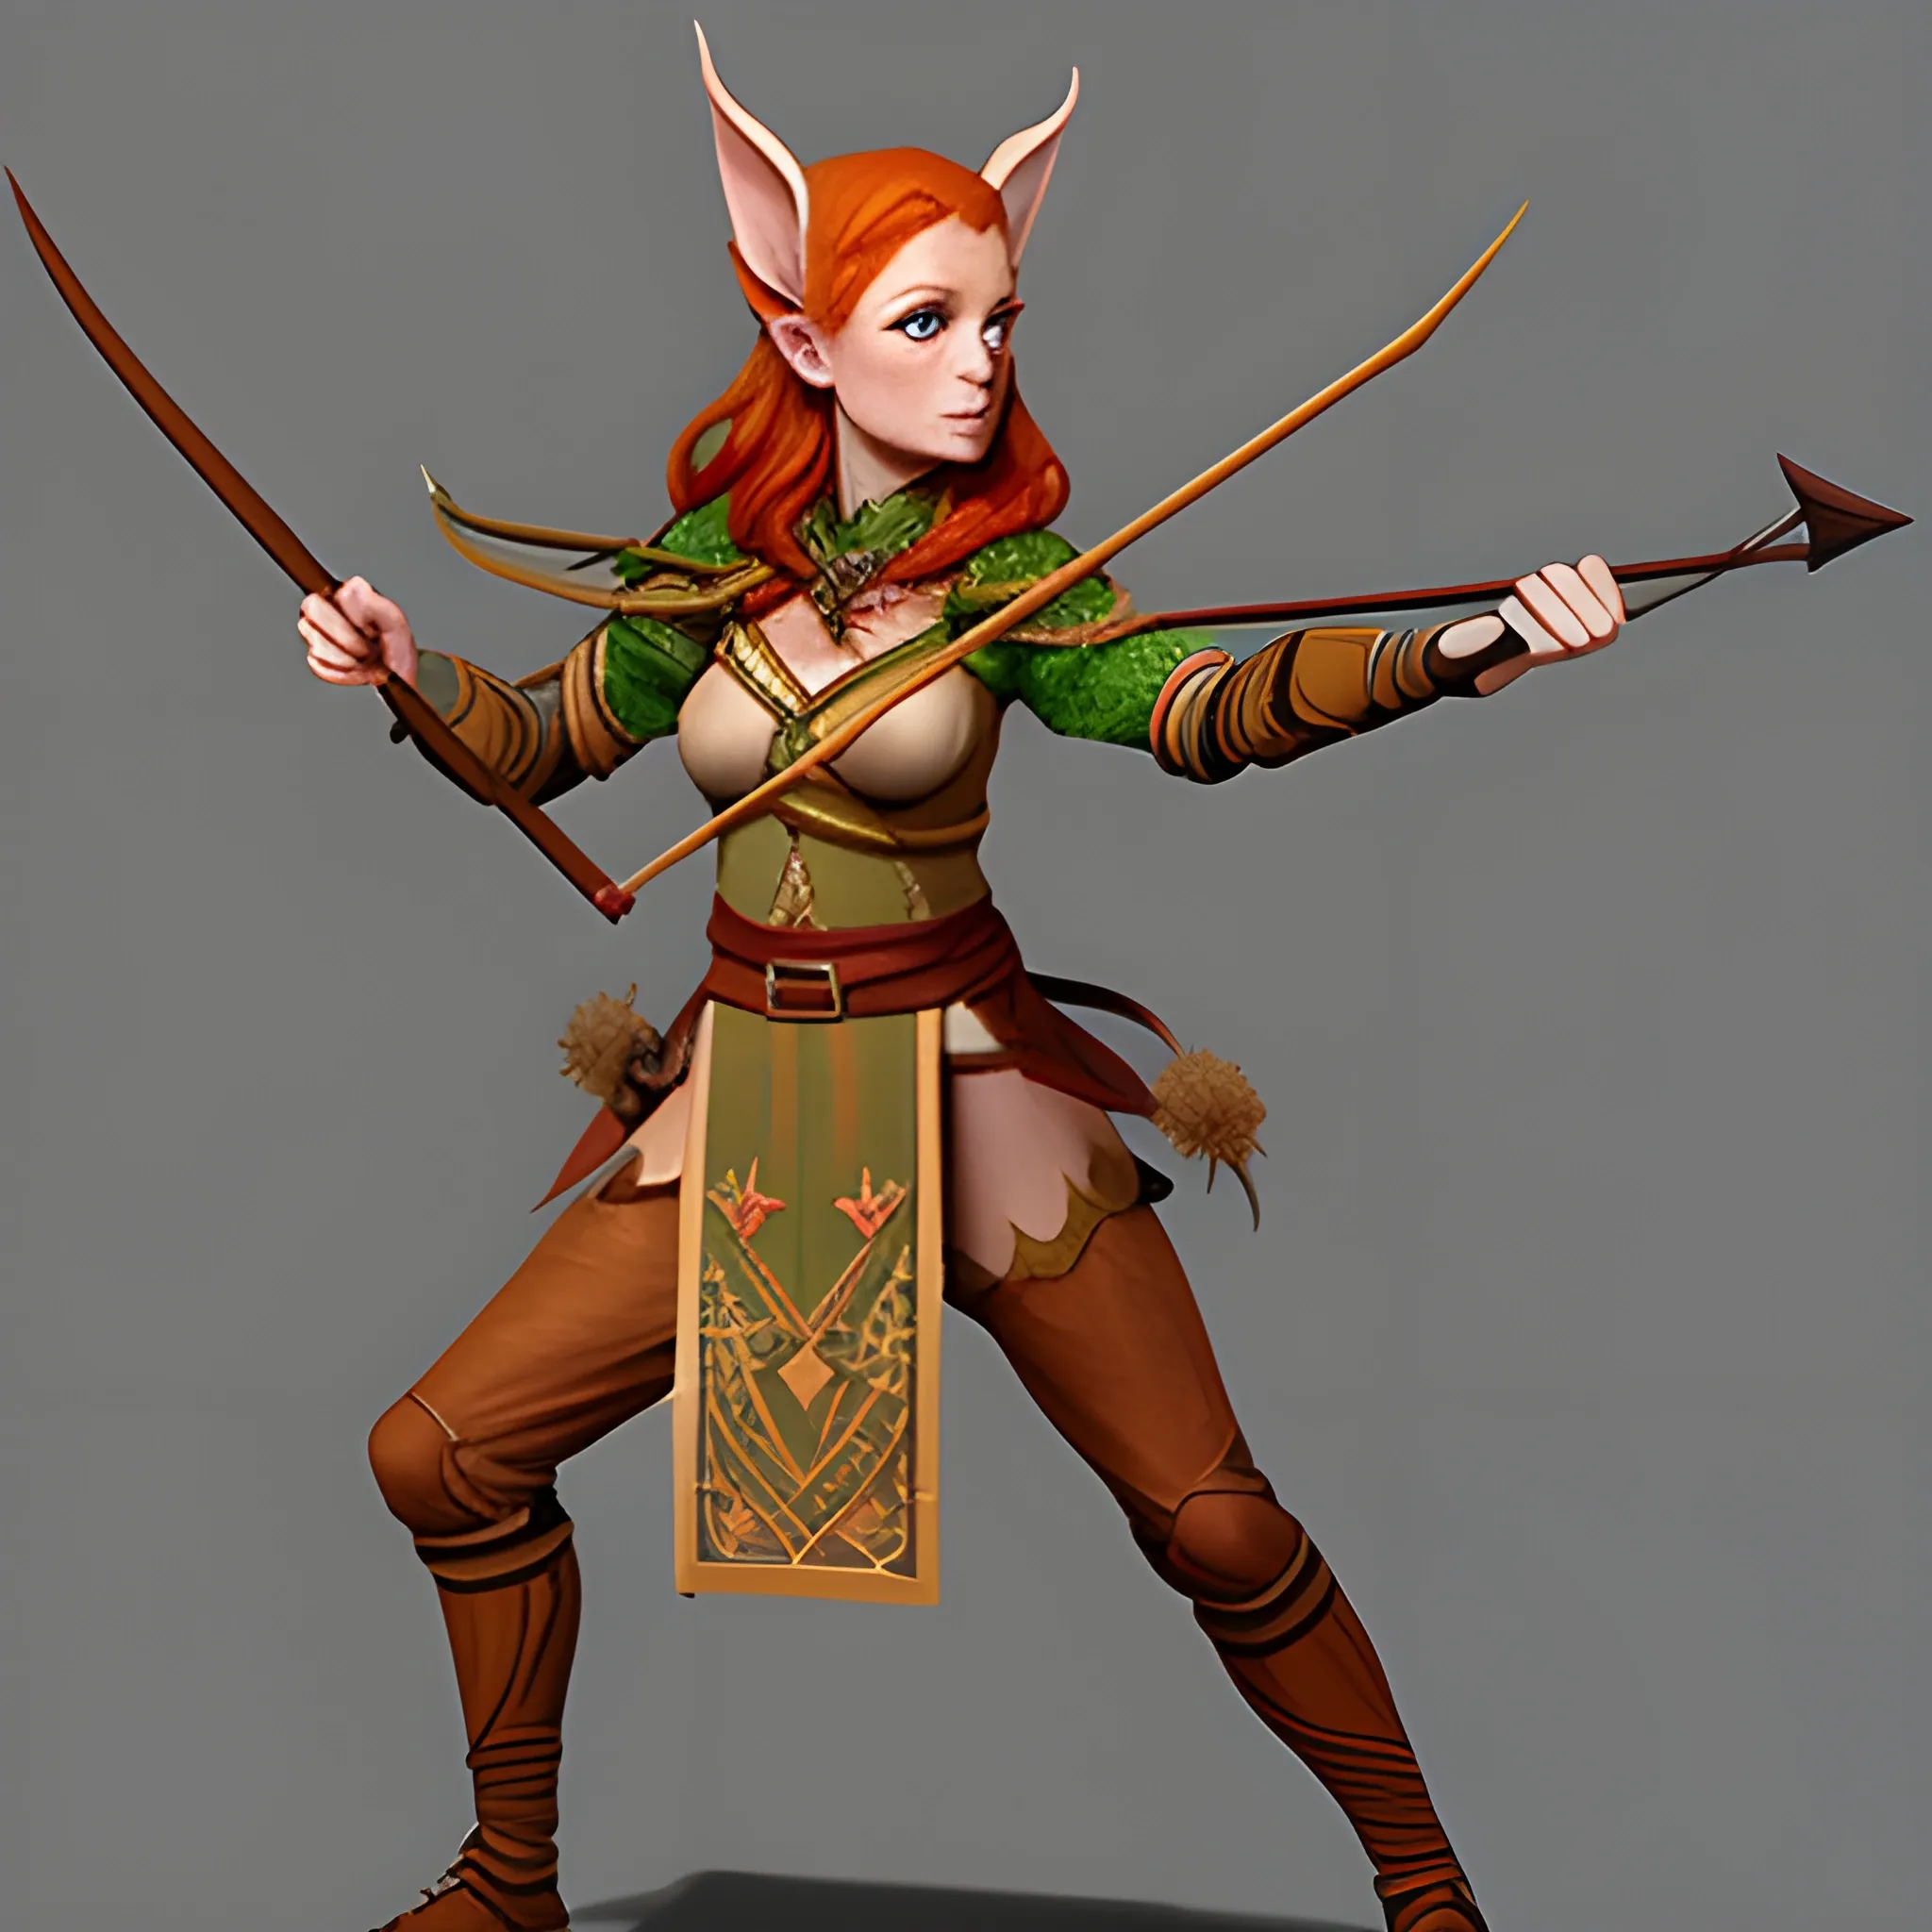 Wooden Elf Female, Concept Art, Ginger hair, Spear and bow